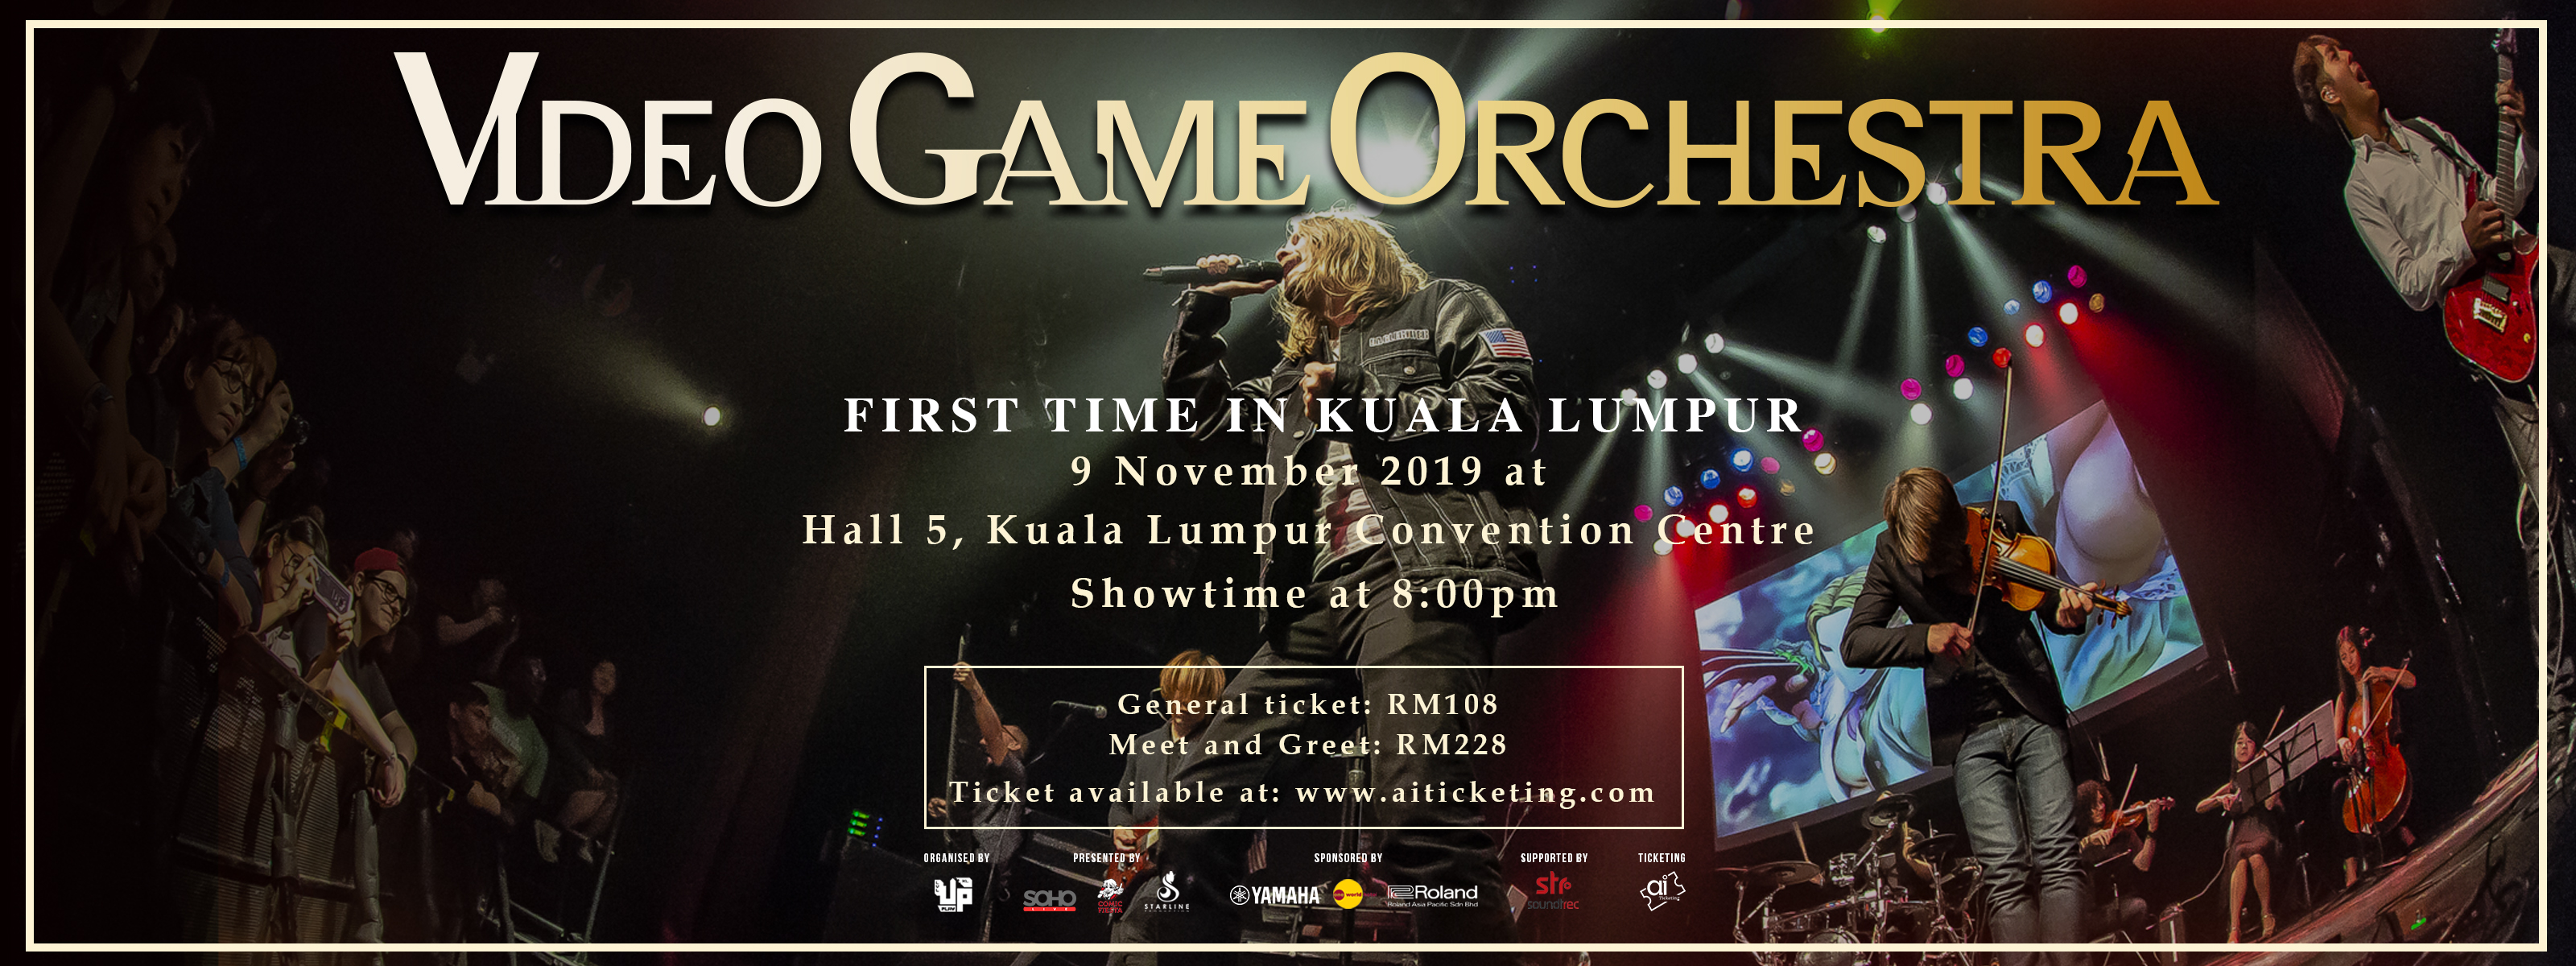 Video Game Orchestra in Kuala Lumpur